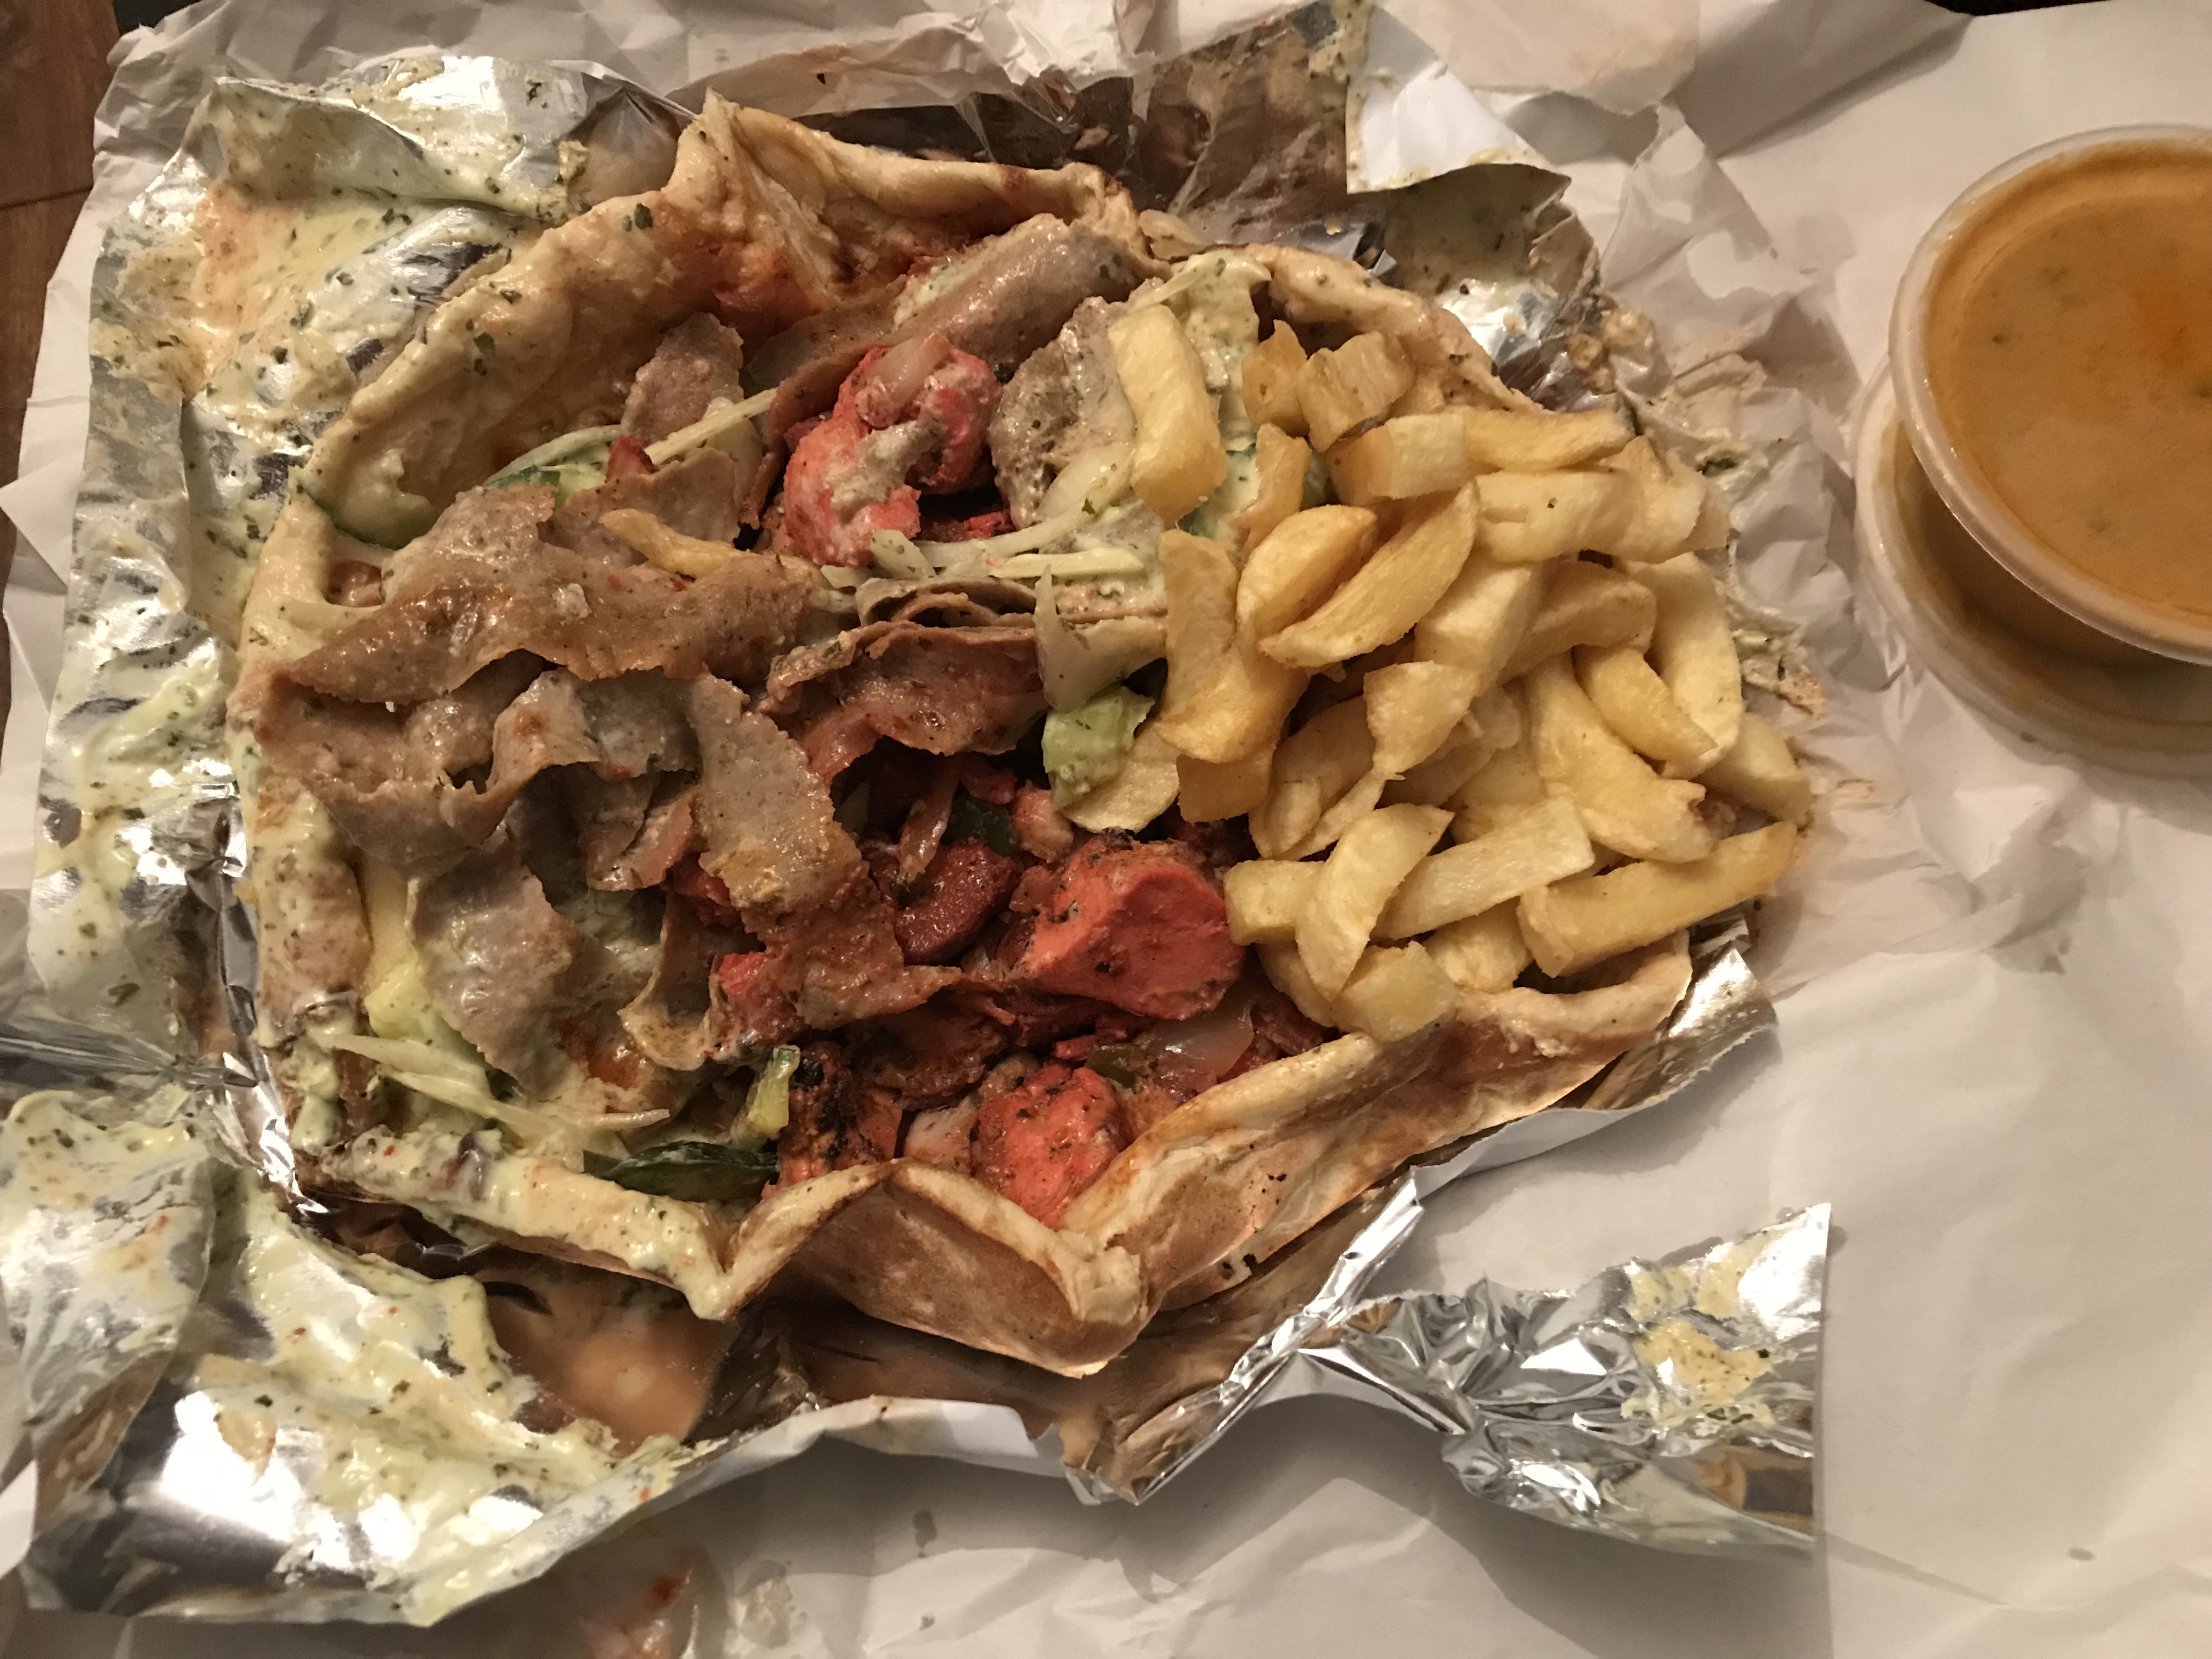 Dirty Takeaway Pictures Volume 3 - Page 281 - Food, Drink & Restaurants - PistonHeads